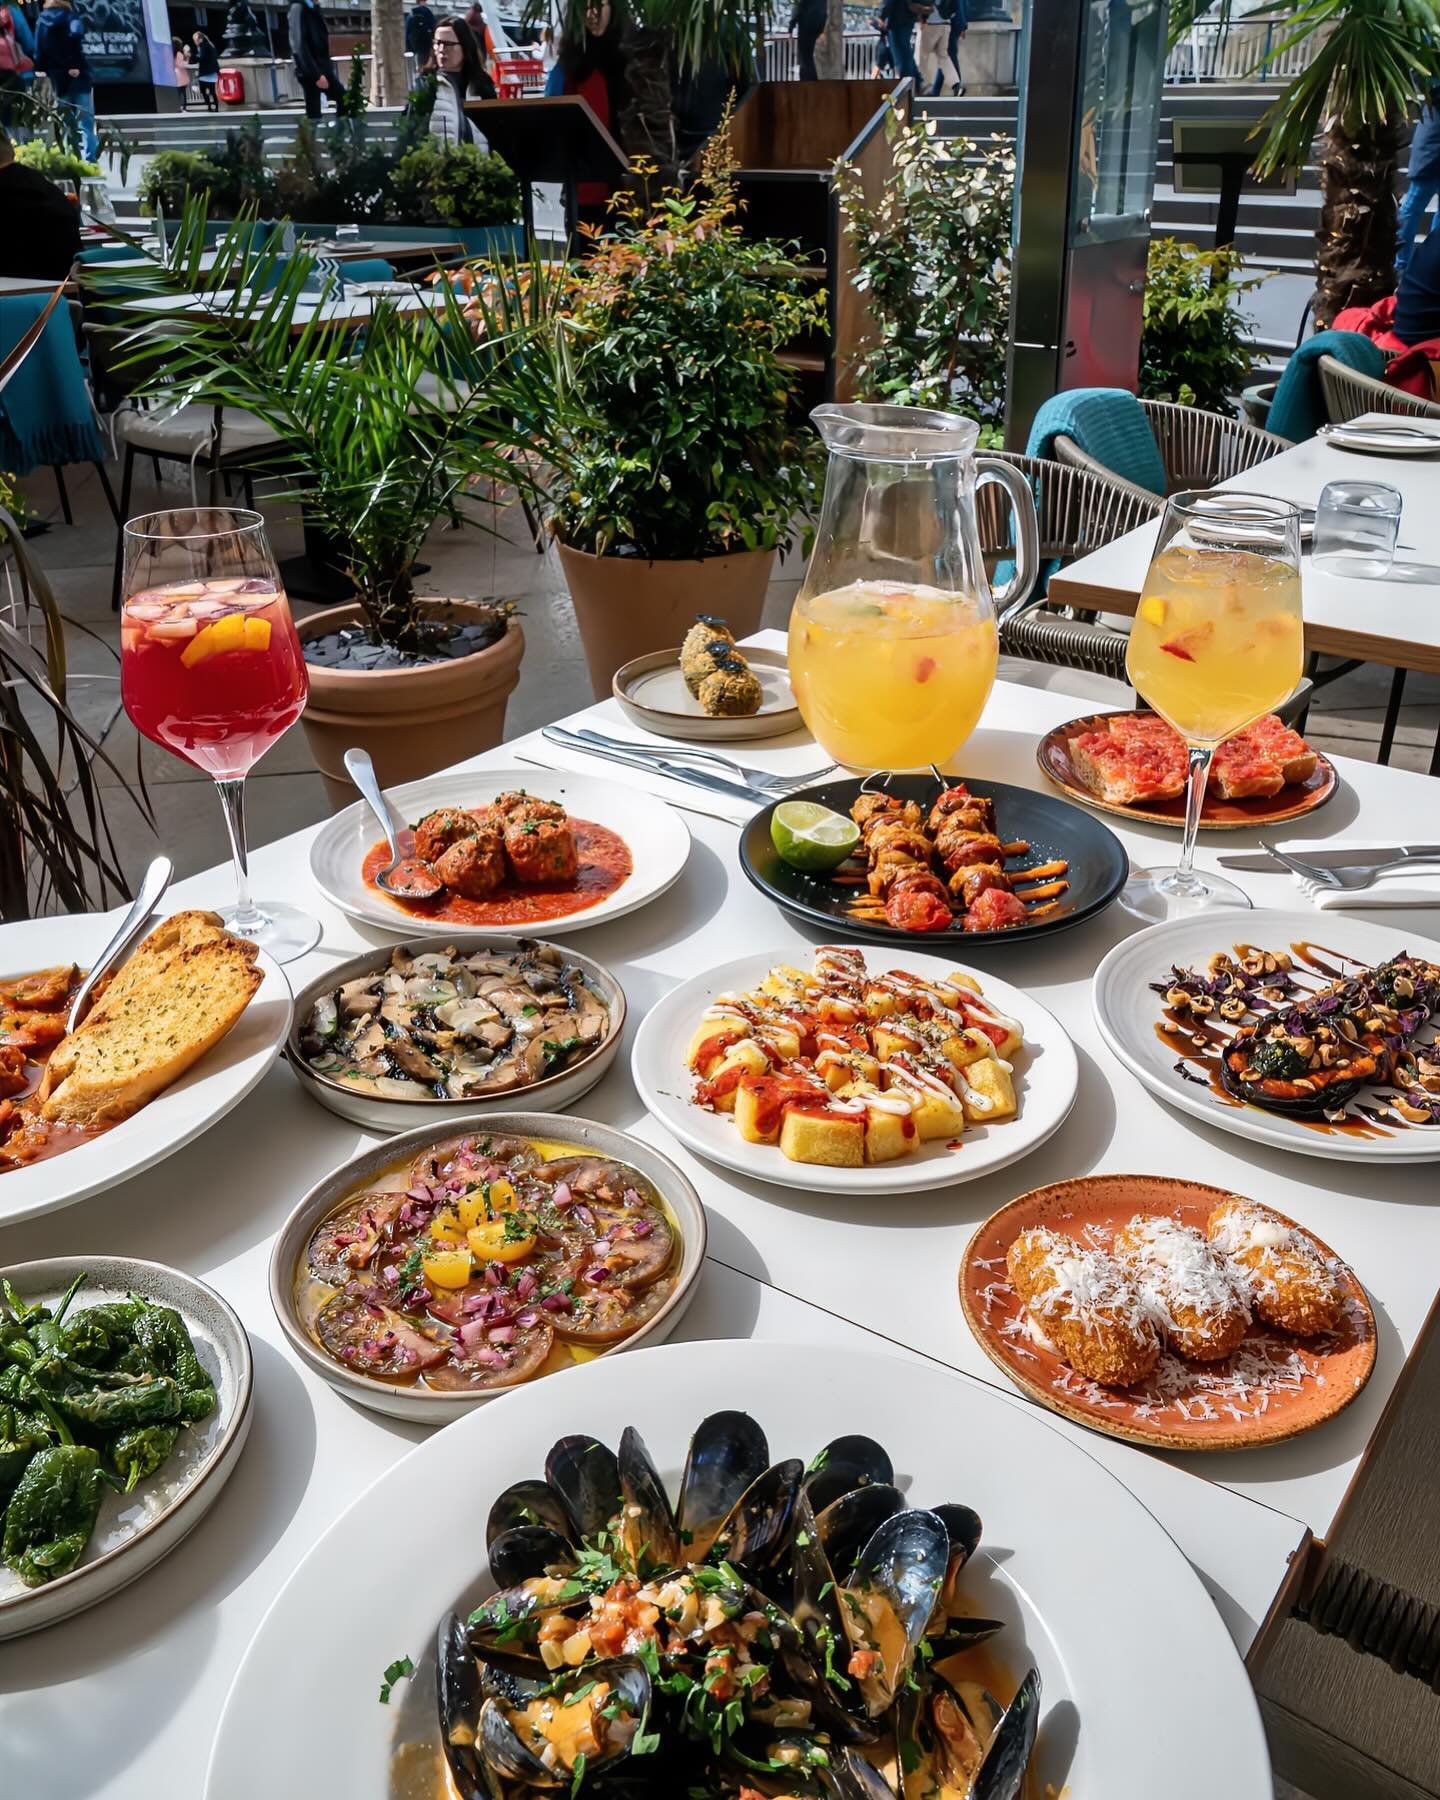 Picture this: 17&deg; sunny day in the terrace☀️, surrounded by Sangria🍷 and Tapas.🍽️ Feels like Spain, doesn't it? But nope, it's London, with the iconic views. Life's full of surprises! 🇬🇧🇪🇸
.
.
.
.
#terraceview #terrace #alfrescodining #alfr